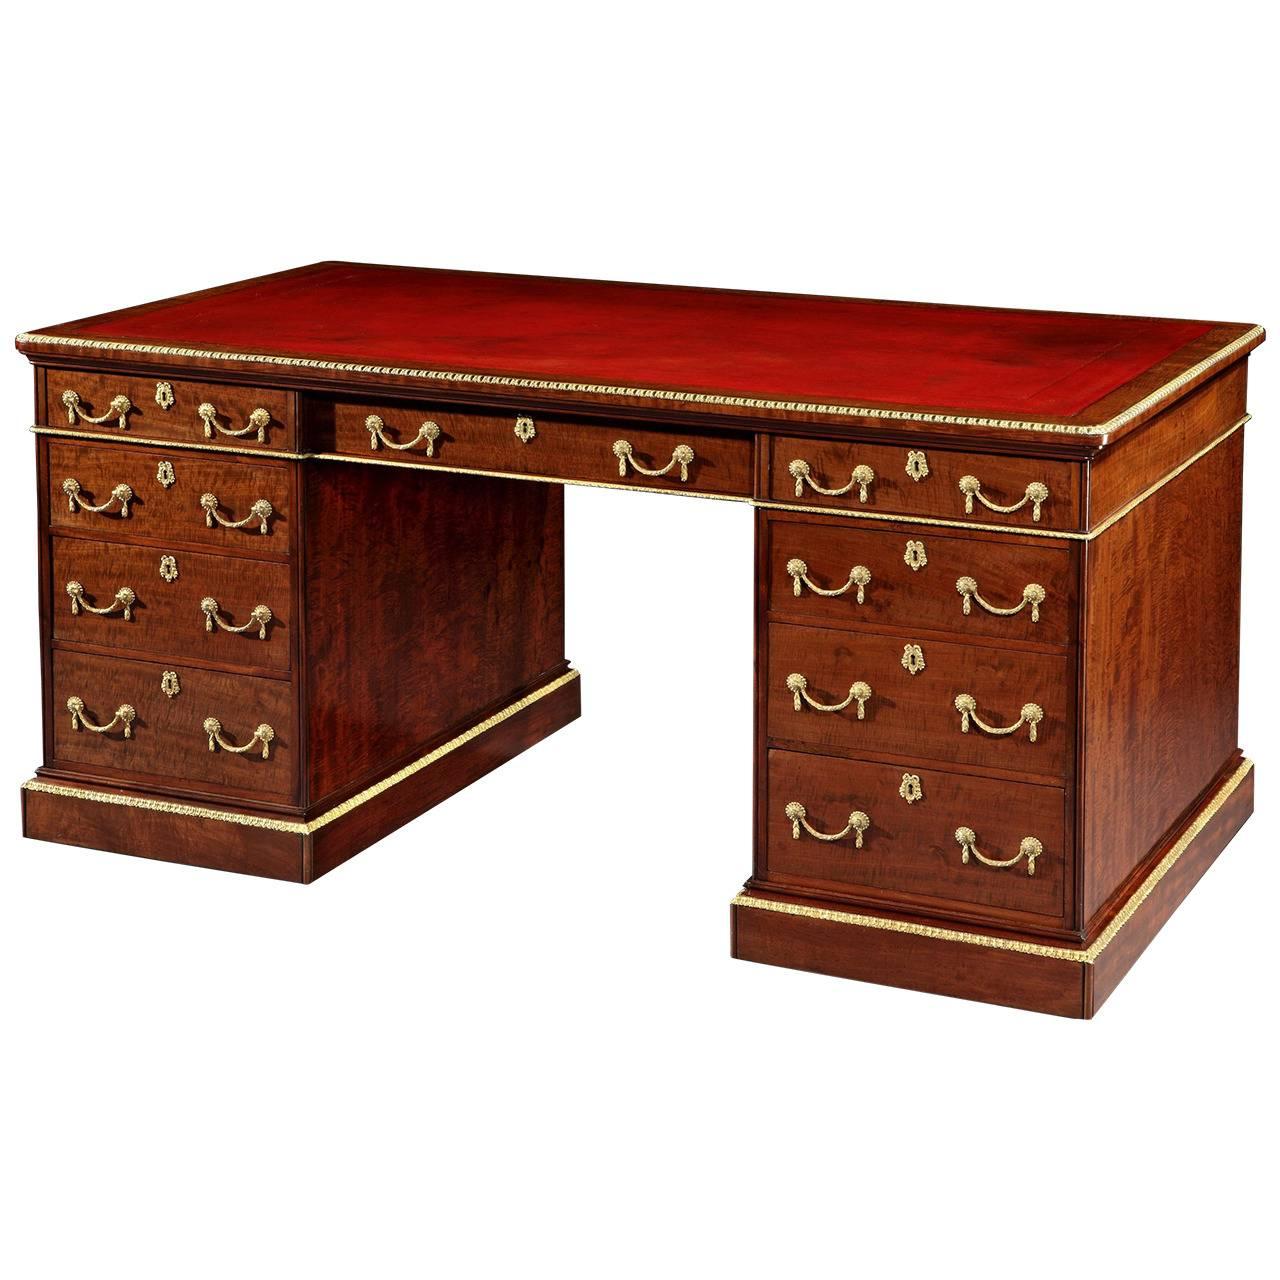 English Mahogany and Ormolu Partners Desk with Red Leather, 19th Century For Sale